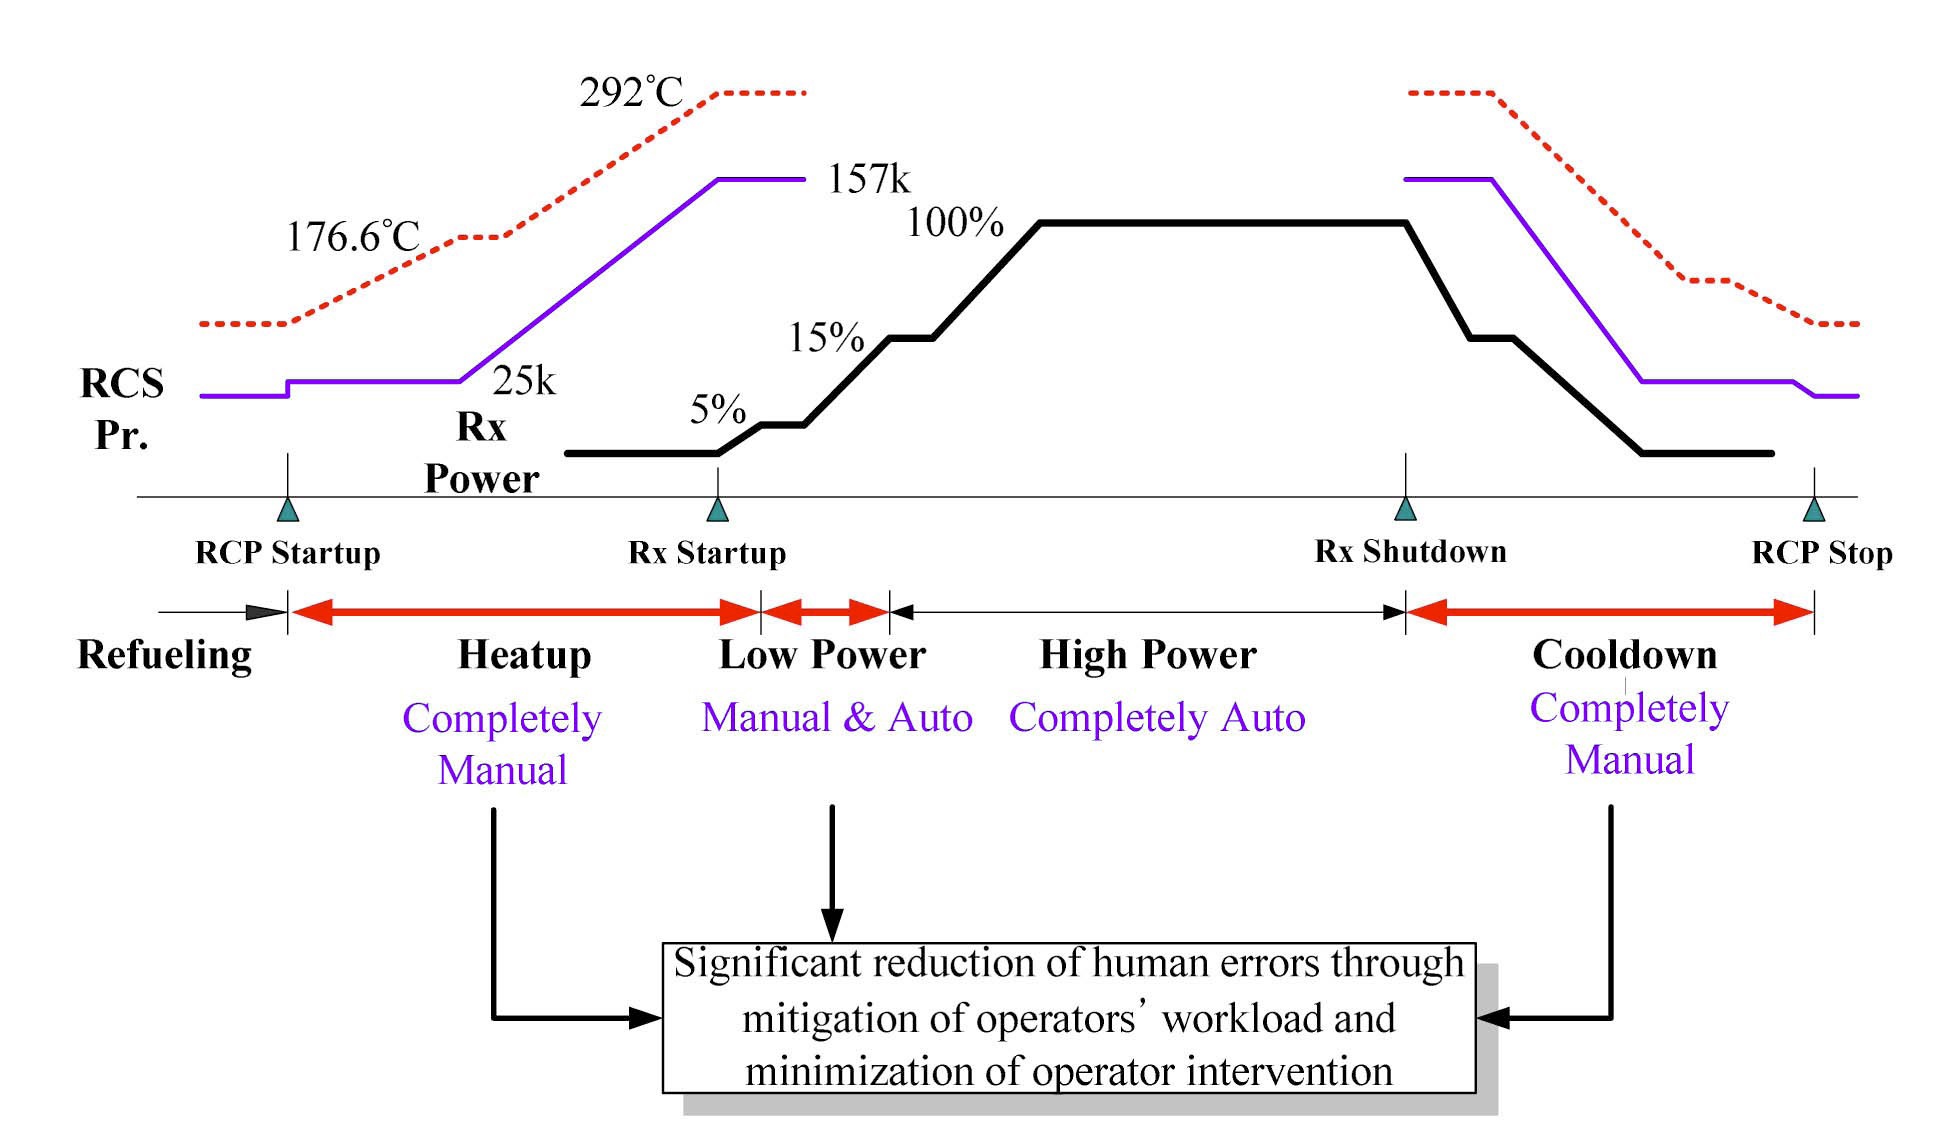 Typical Operation Mode and Automation Level in PWR